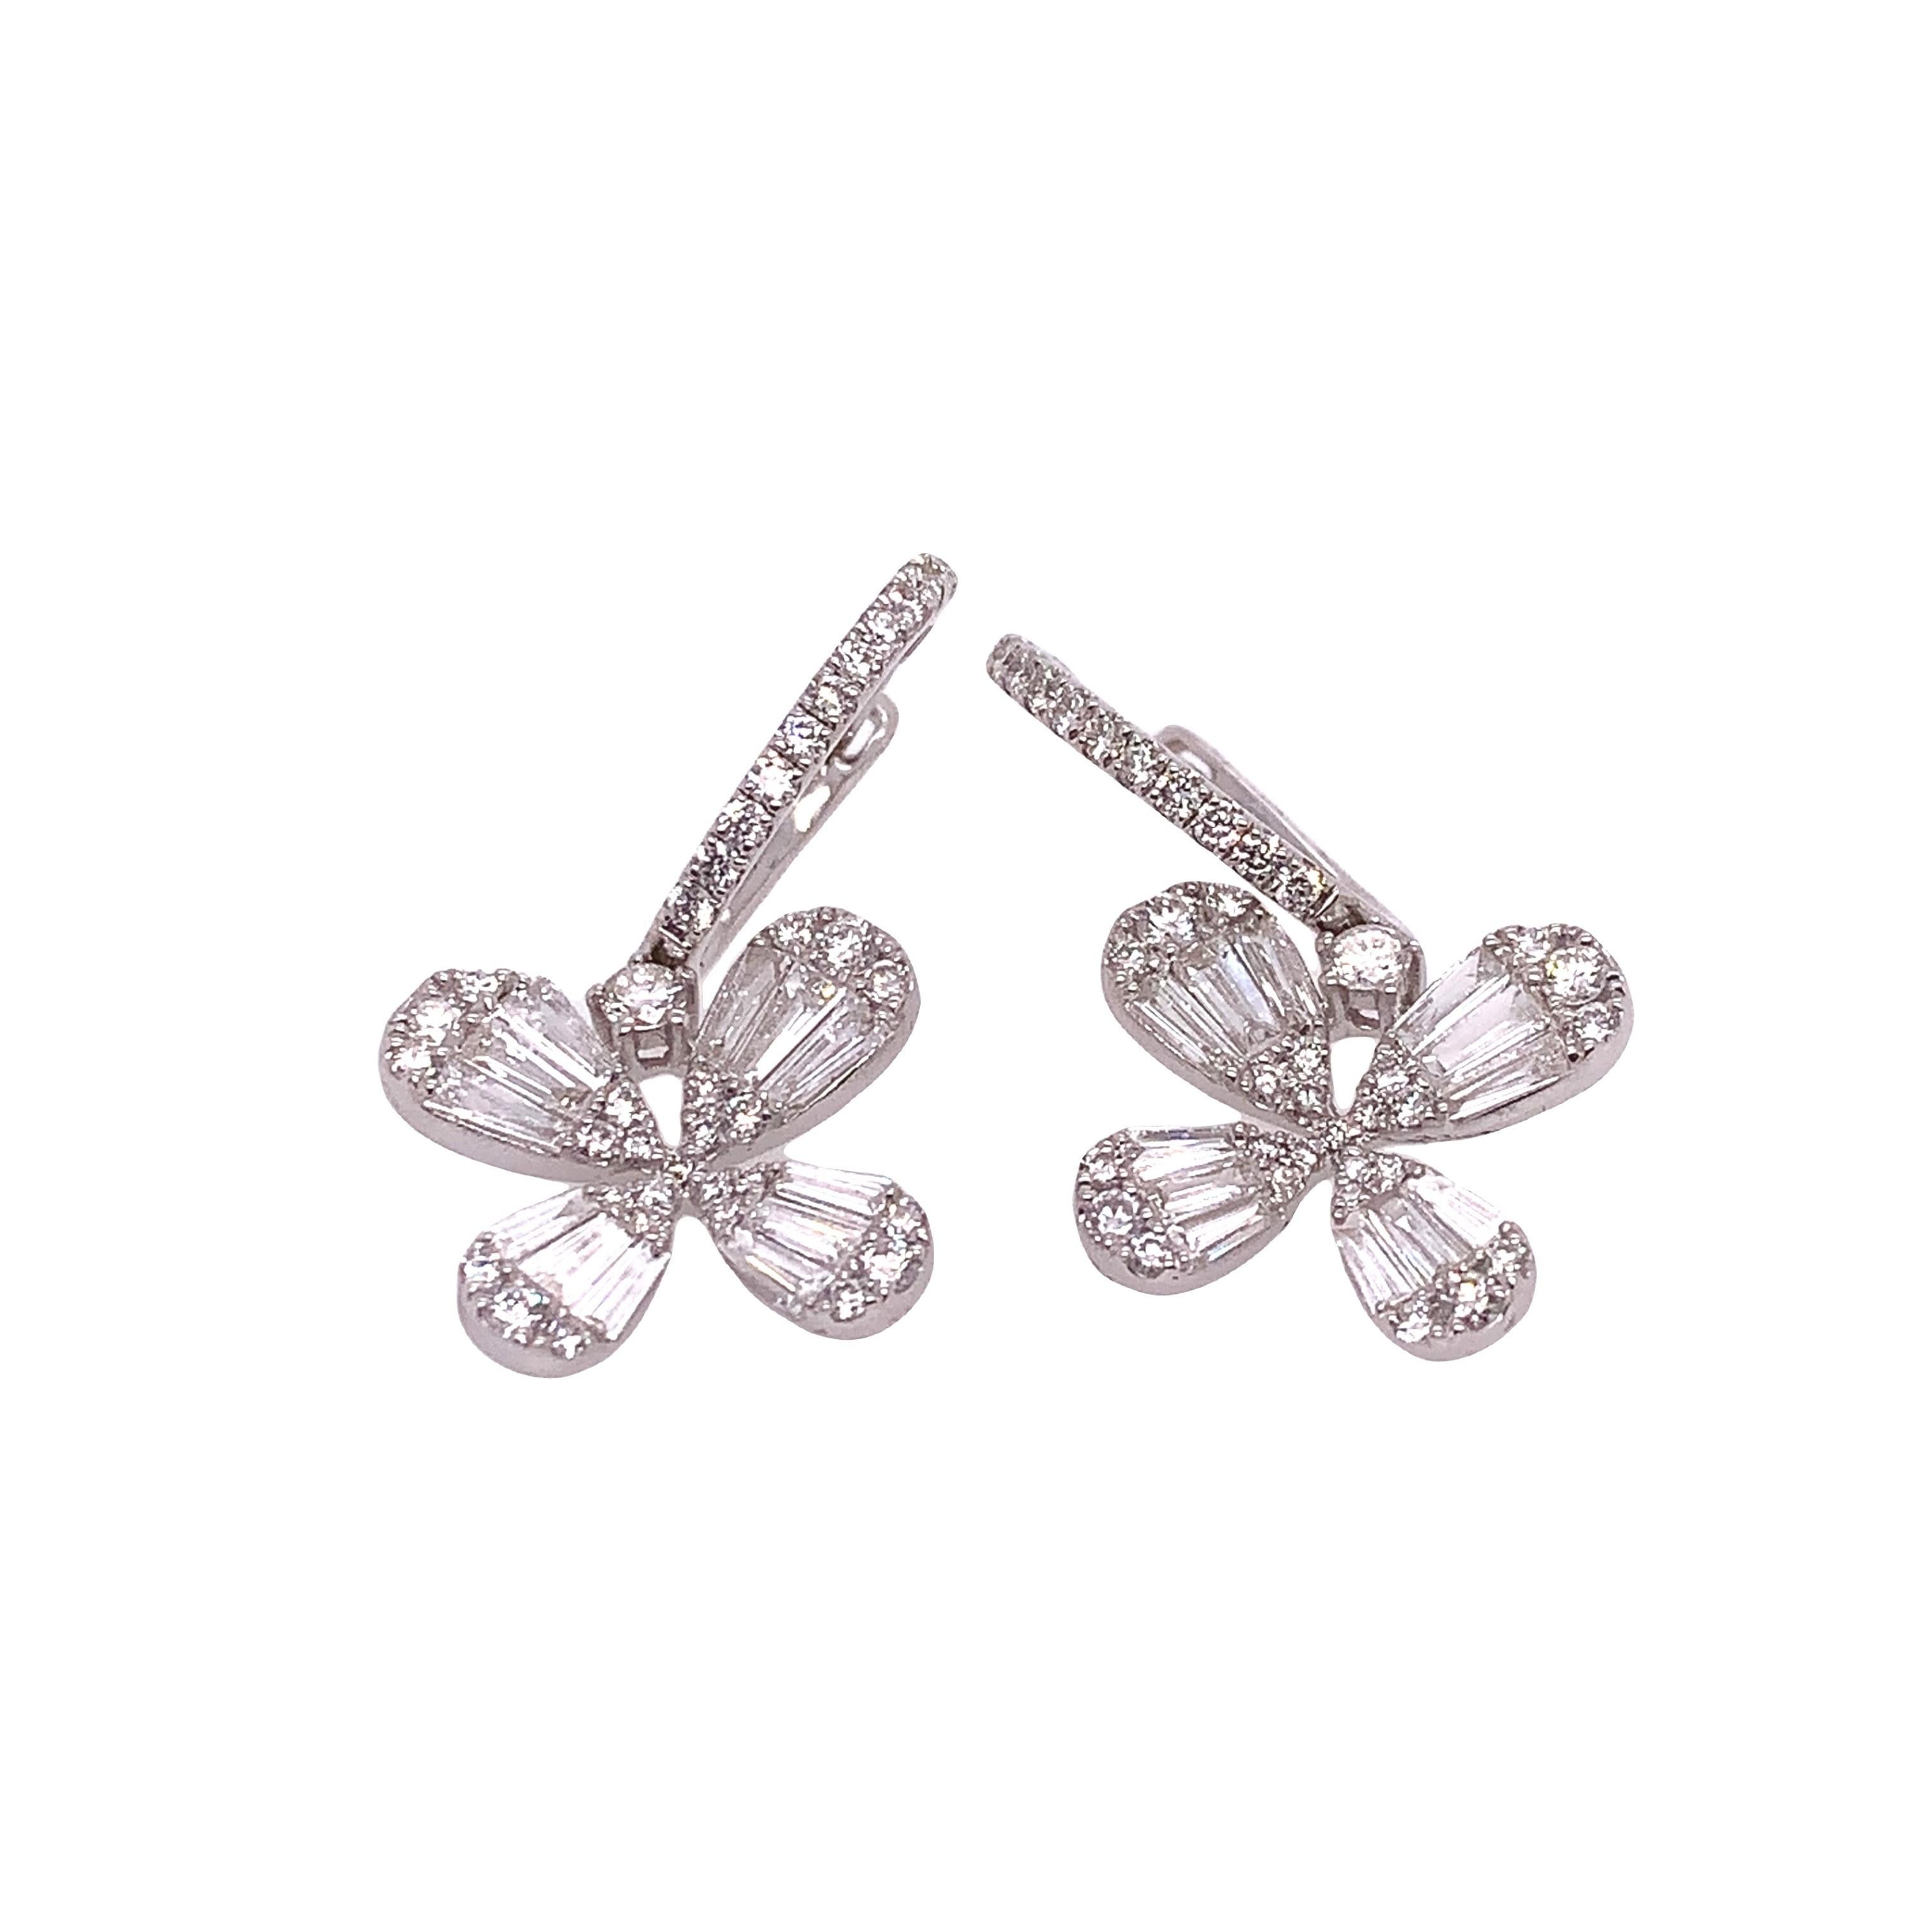 Baguette Collection

Delicately handcrafted, this pair of earrings features total 1.34 carat white diamonds set in an 18K white gold. A butterfly design drop down from tiny huggees giving the earrings a unique look.

Diamond: 1.34ct total weight
All